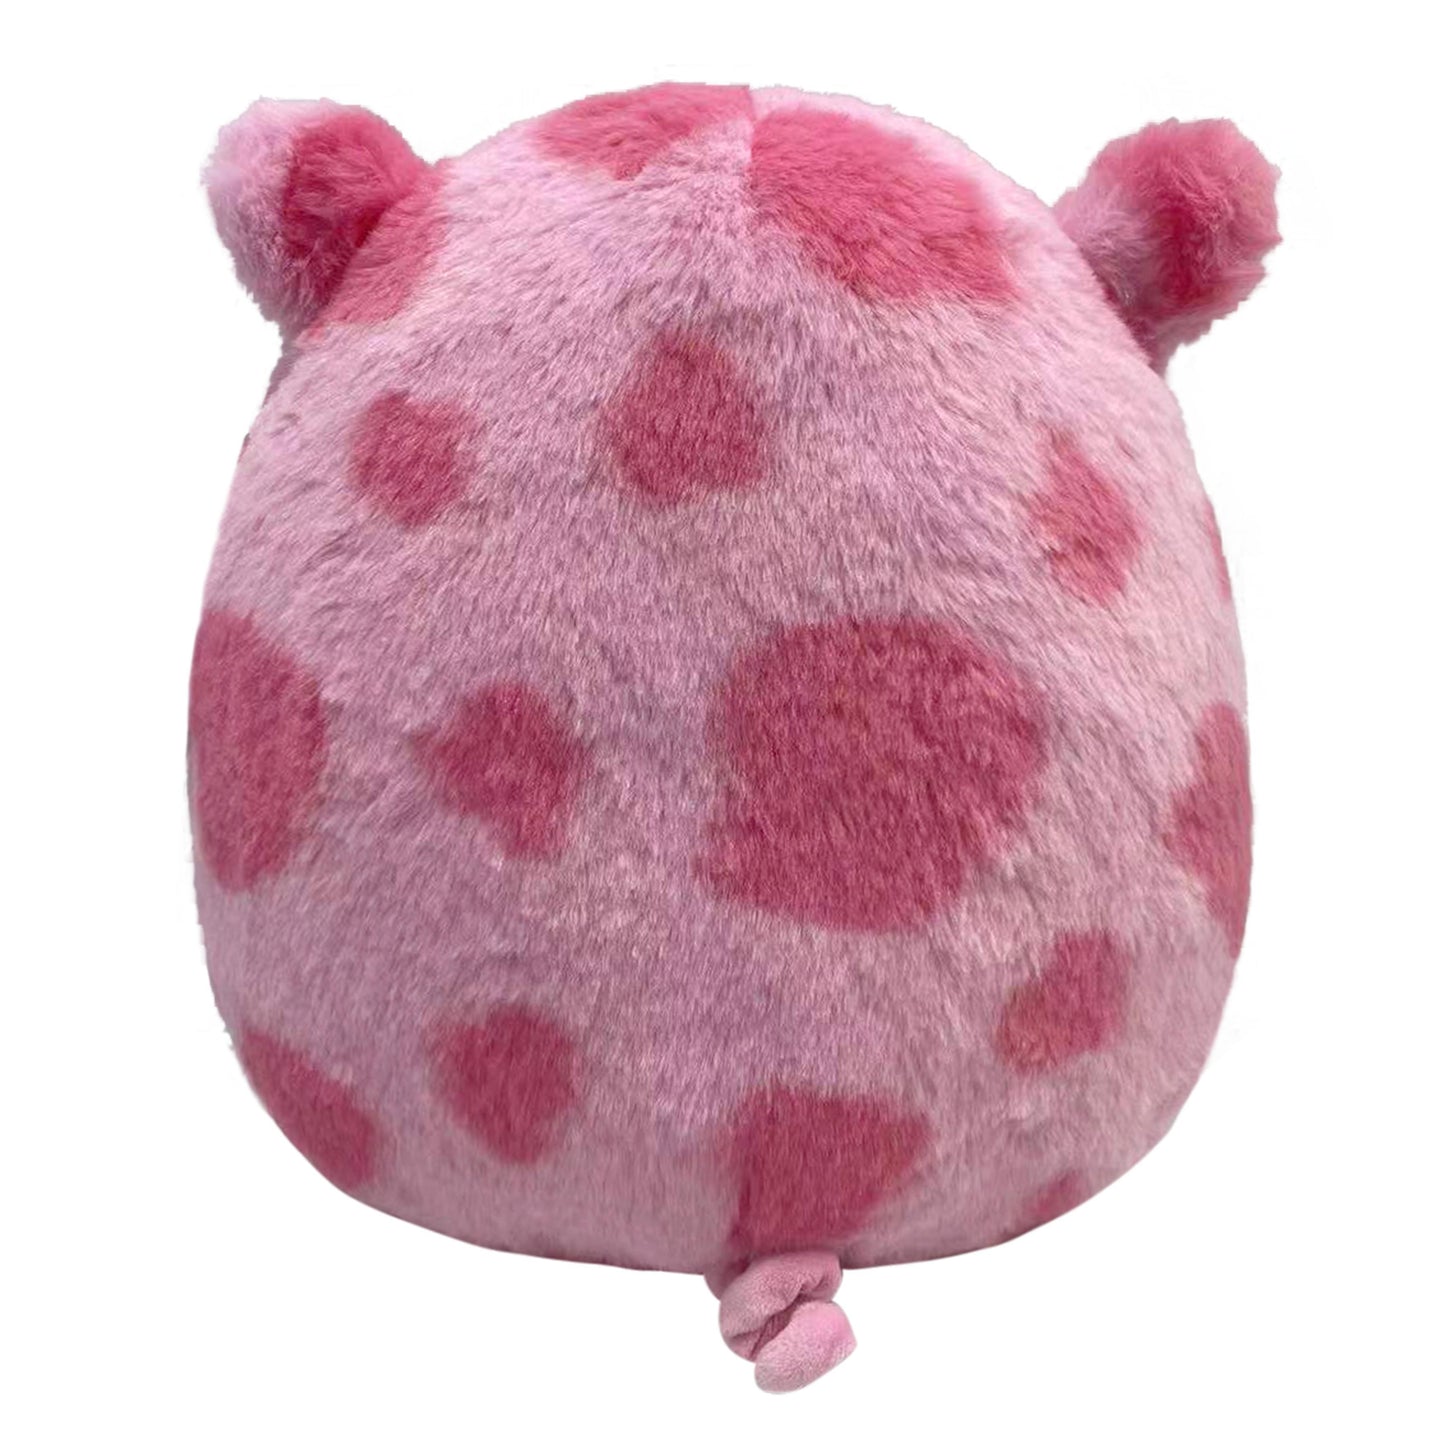 SQUISHMALLOWS 30 CM FUZZ A MALLOWS GWENDLE THE PIG-Squishmallow-SweMallow